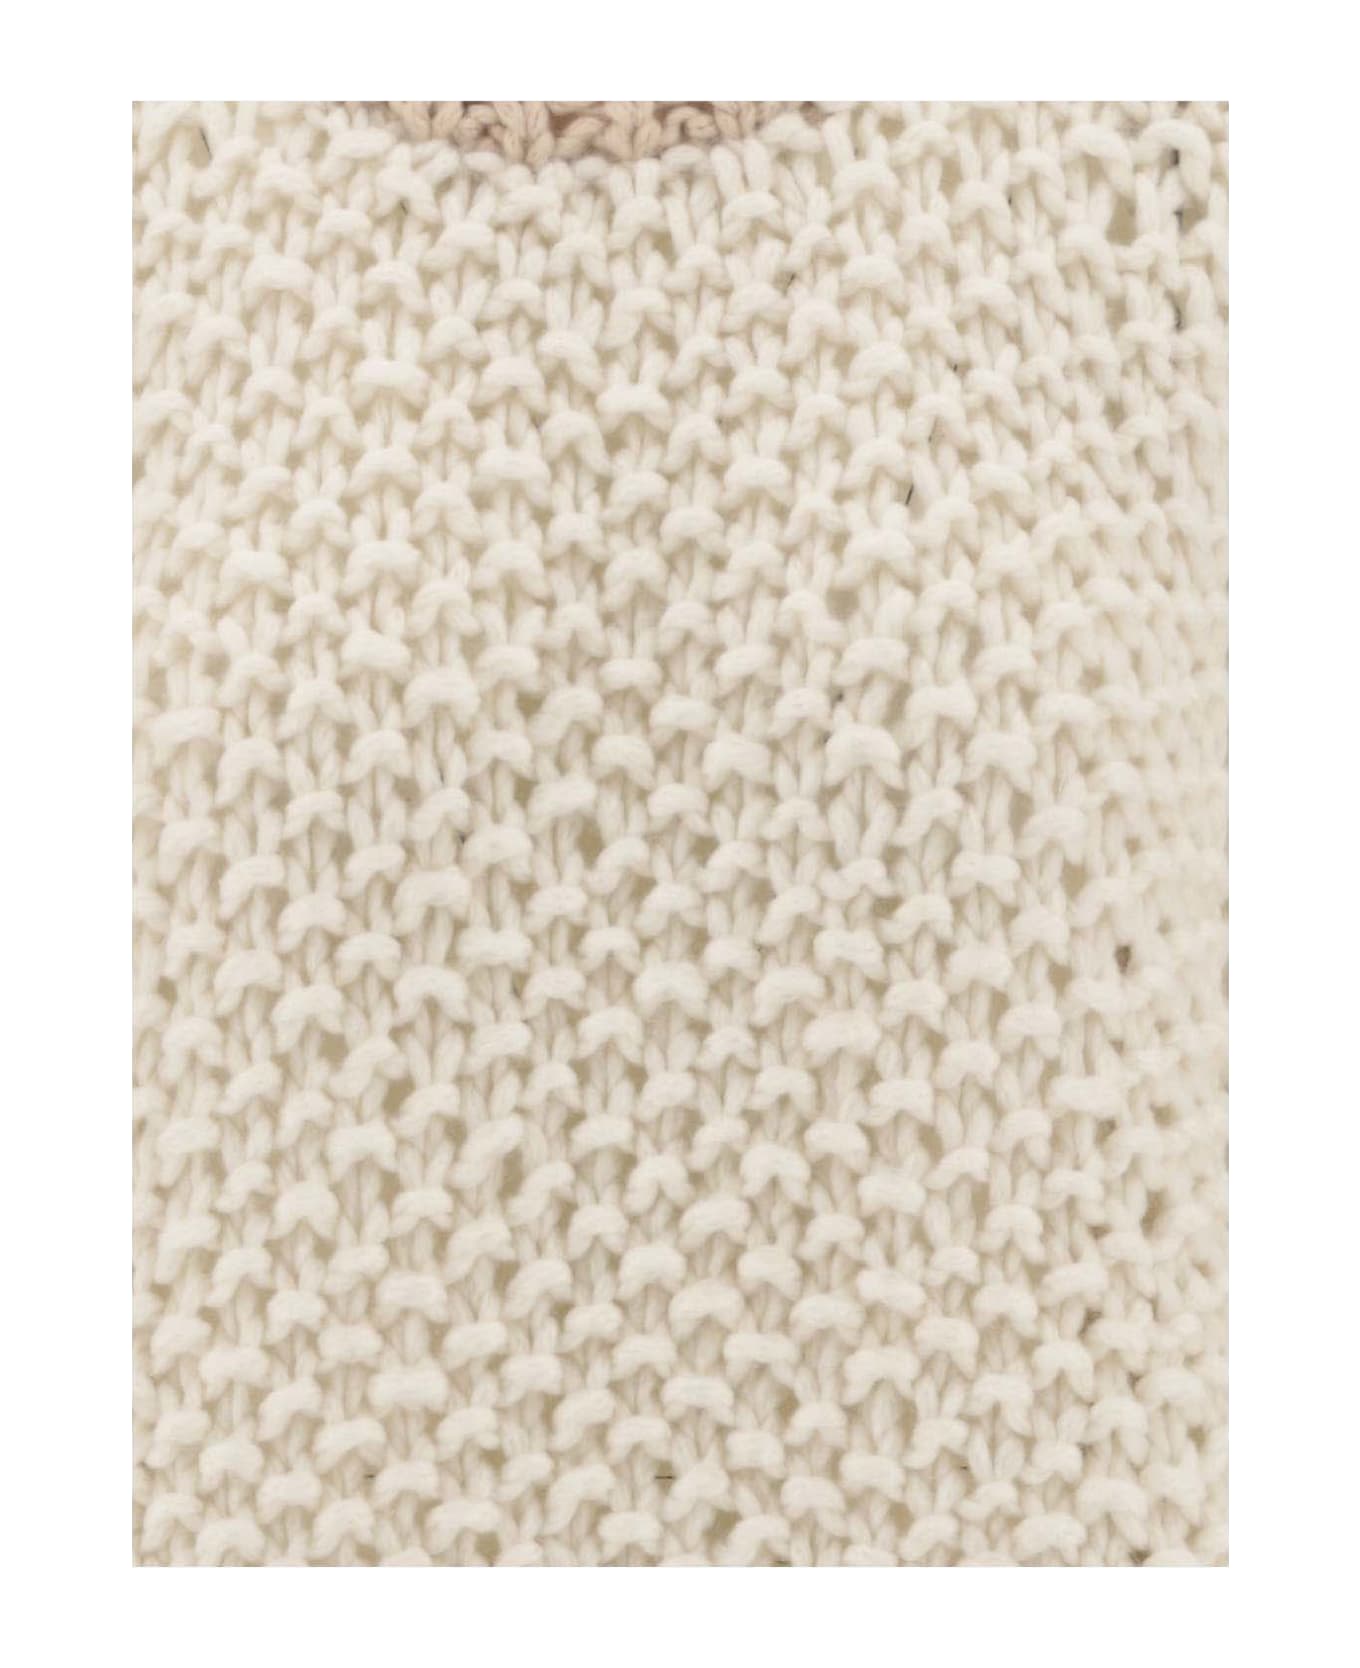 Evyinit Merino Wool Blend Sweater With Contrasting Edges - Ivory